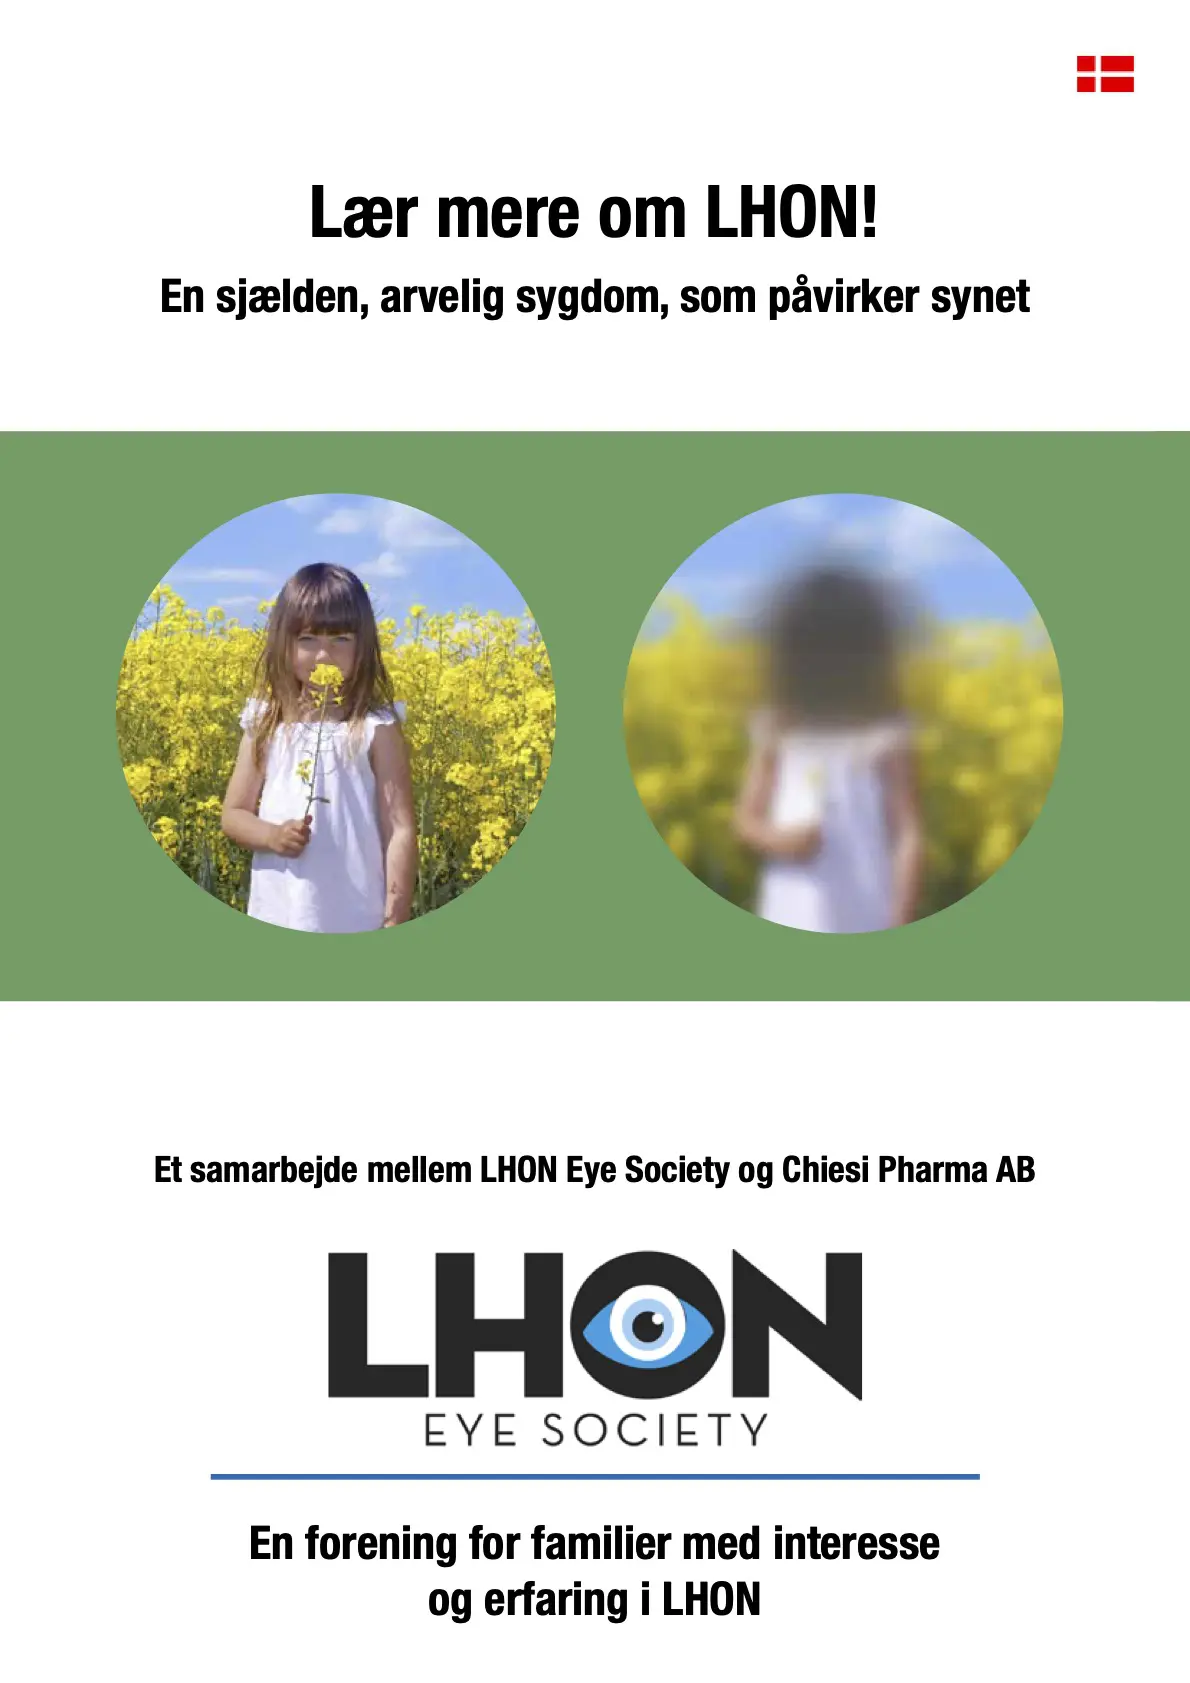 cover image for brochure about LHON in Danish